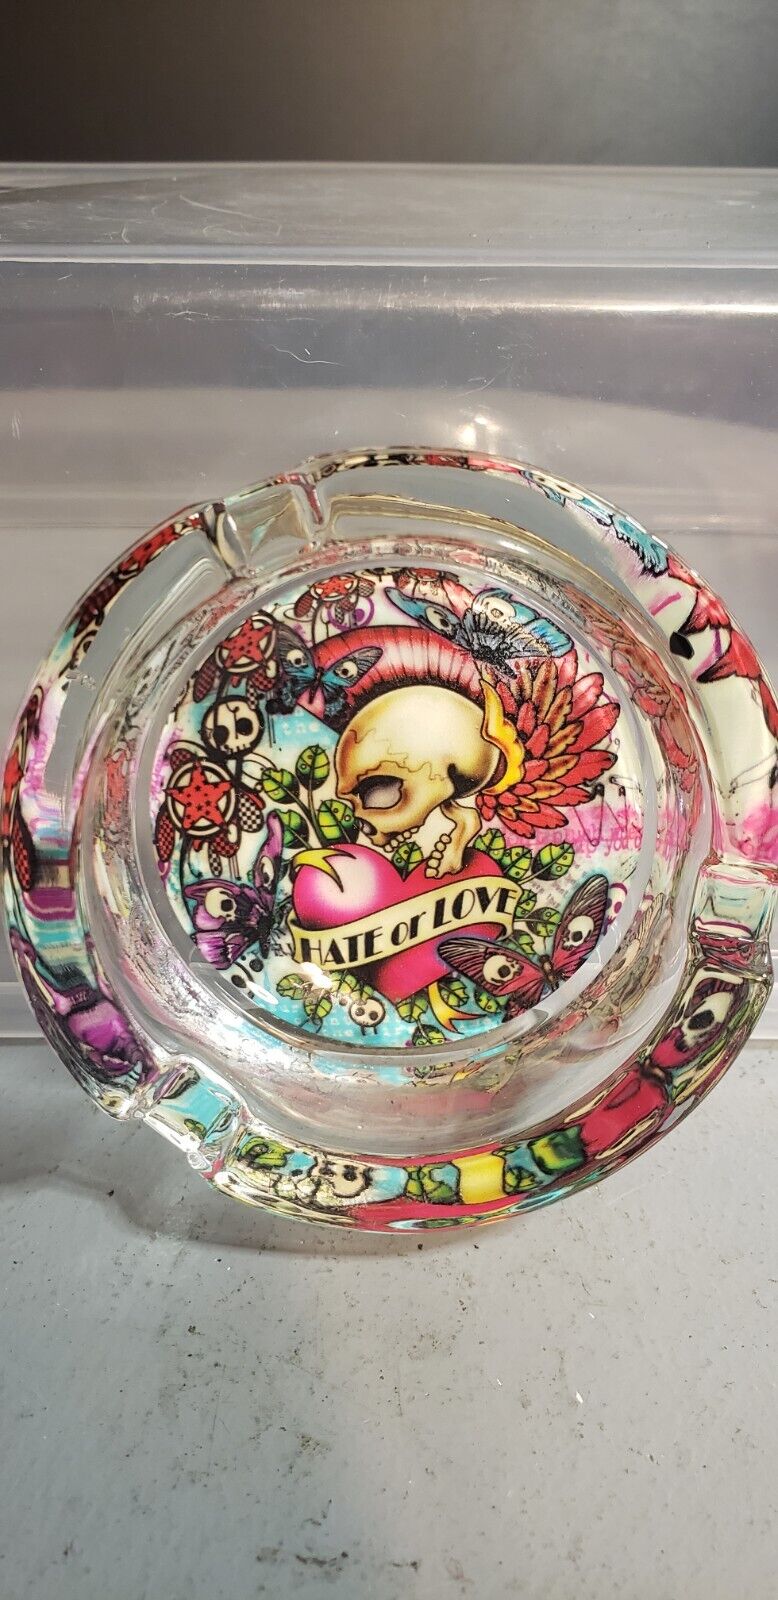 Kalan 3 1/2" Tattoo love or hate Rock 3D Glass Ashtray fast shipping